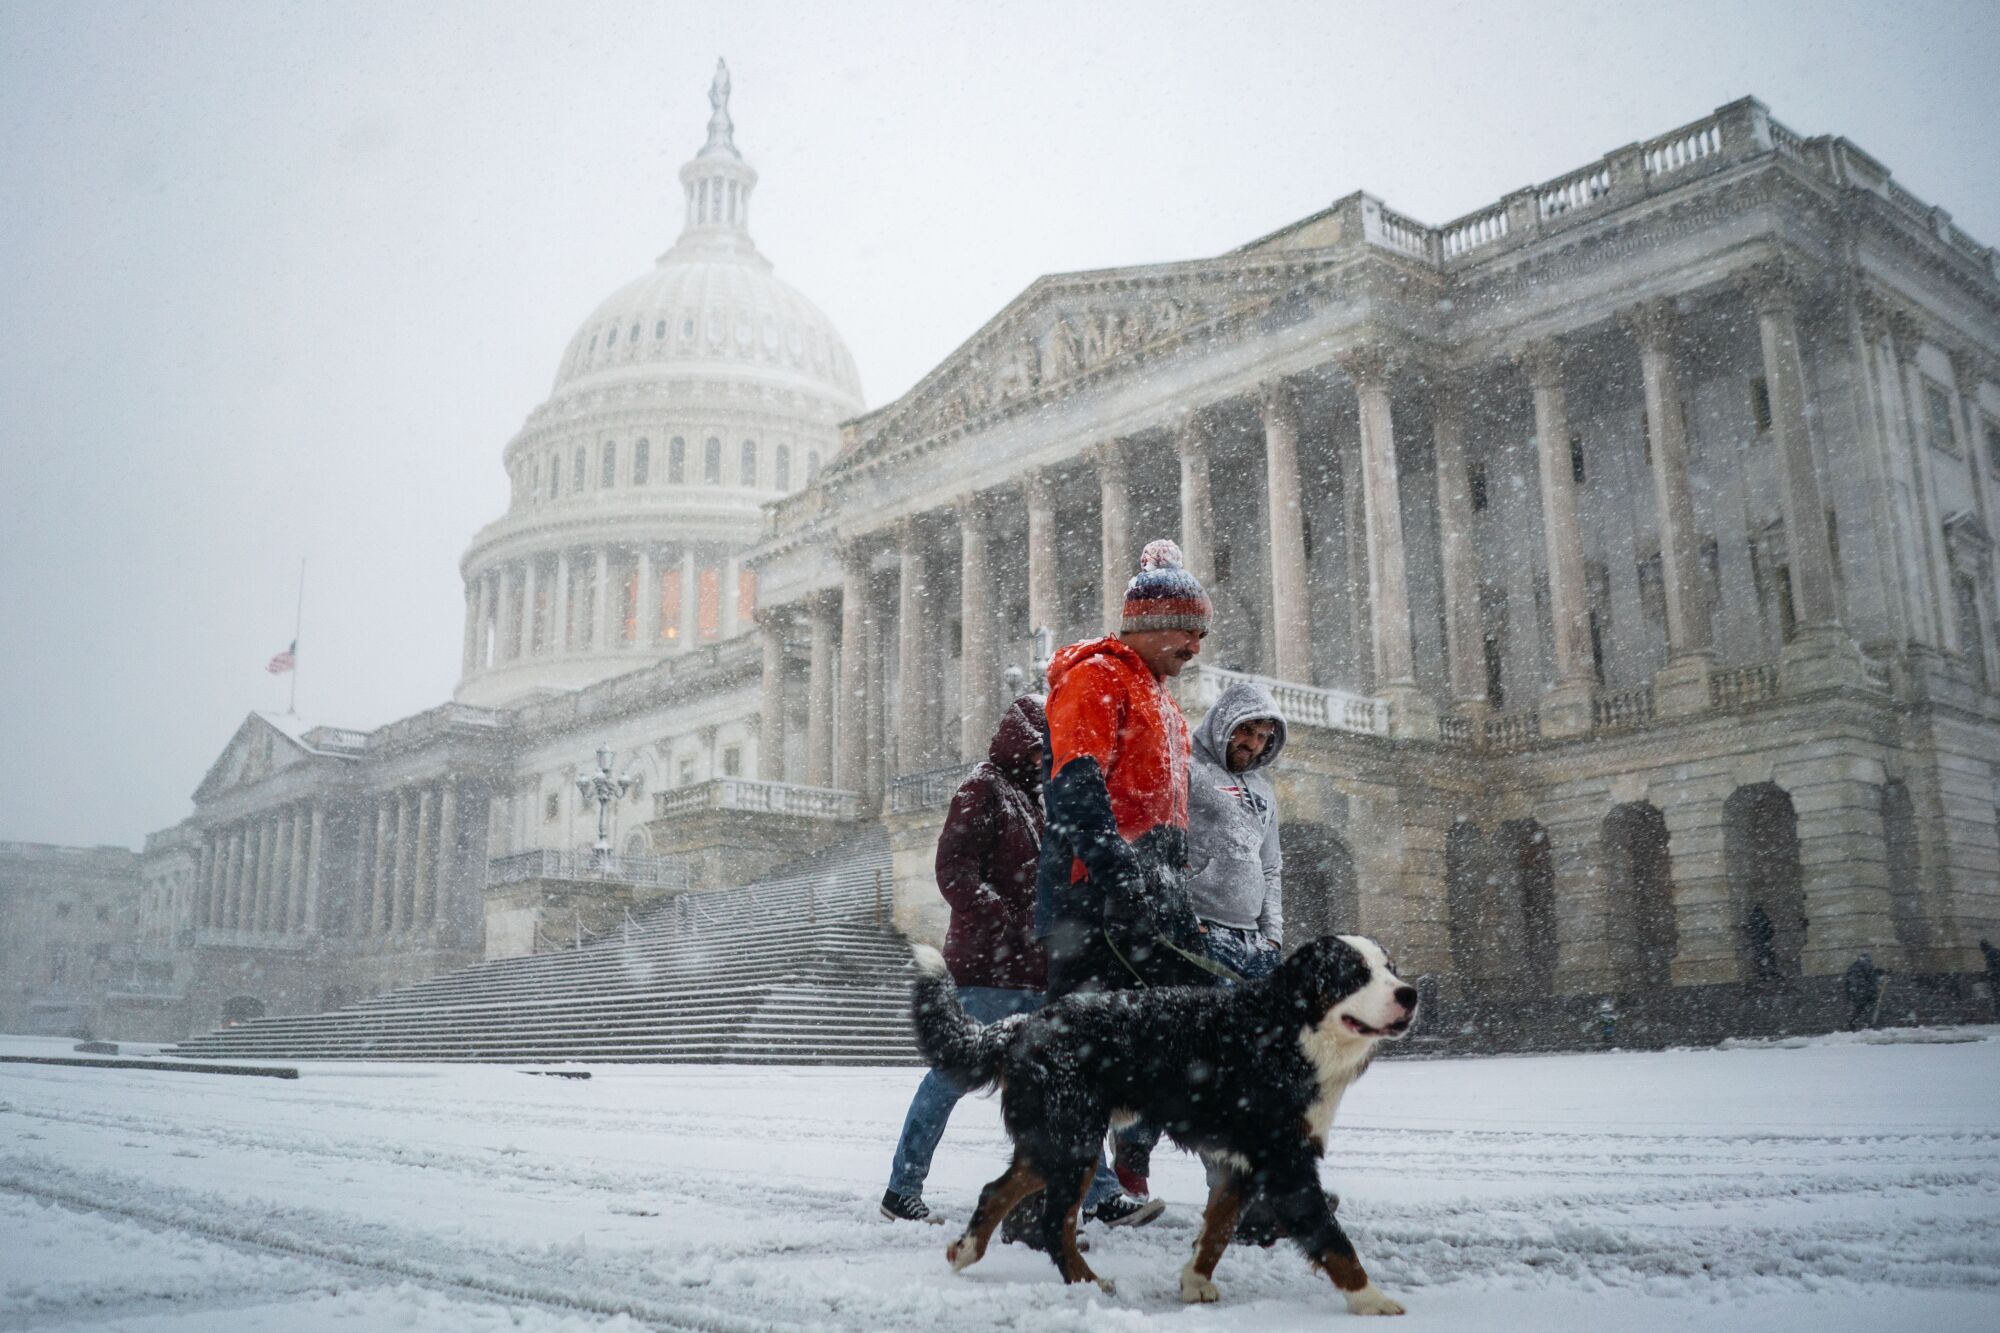 A wide shot of people walking through falling snow in front of U.S. Capitol building